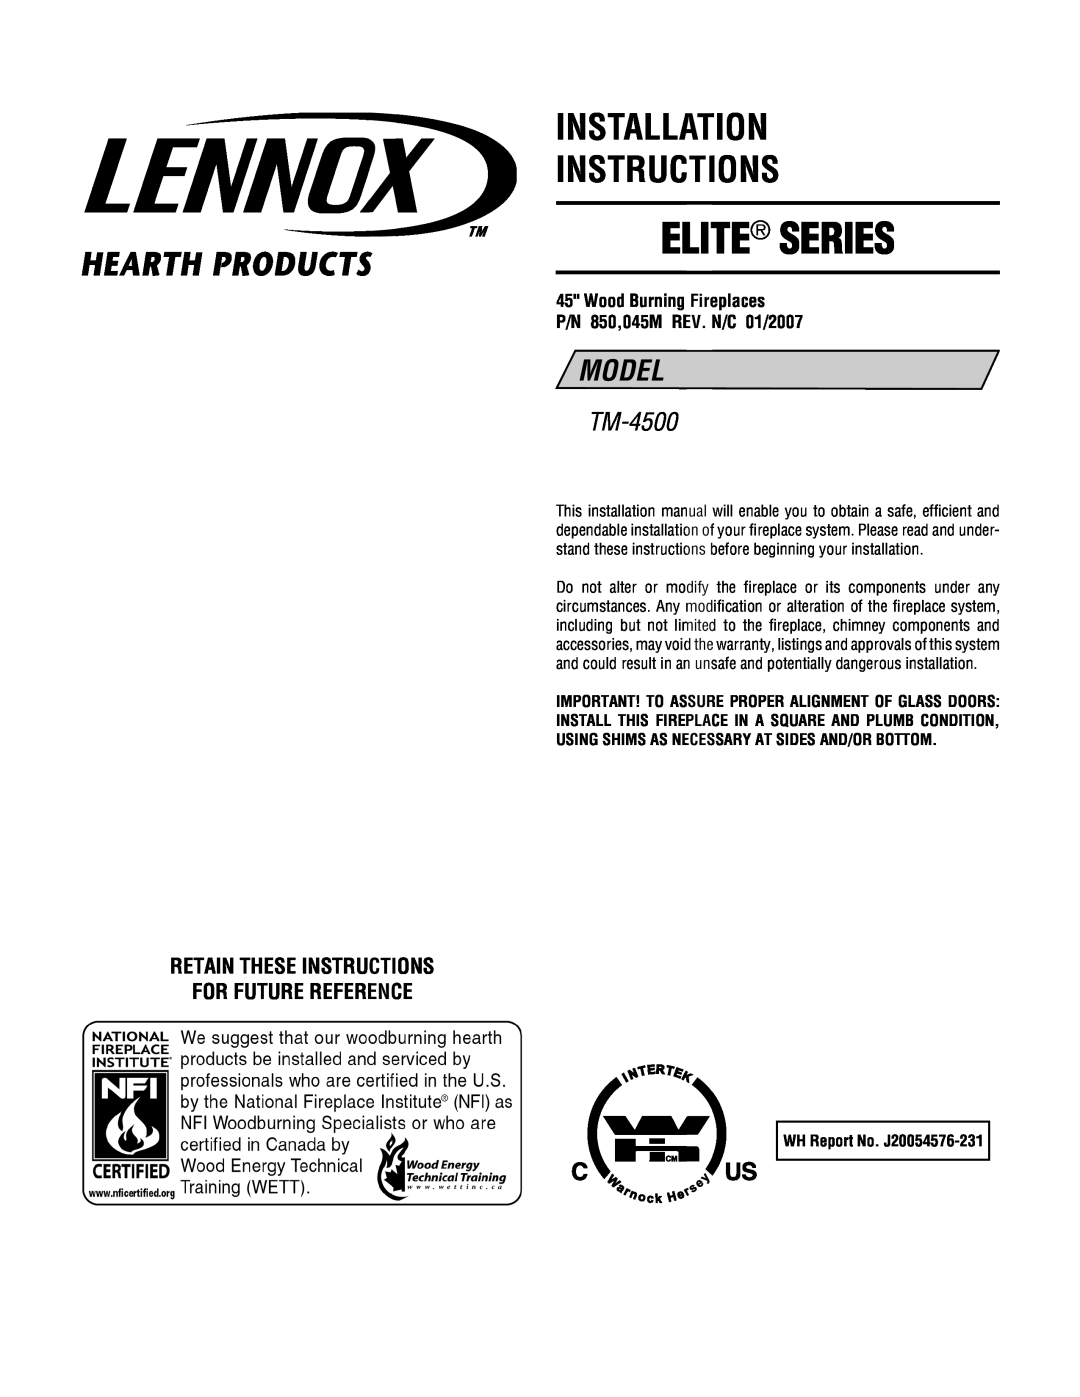 Lucent Technologies TM-4500 installation instructions Retain These Instructions For Future Reference, Elite Series, Model 